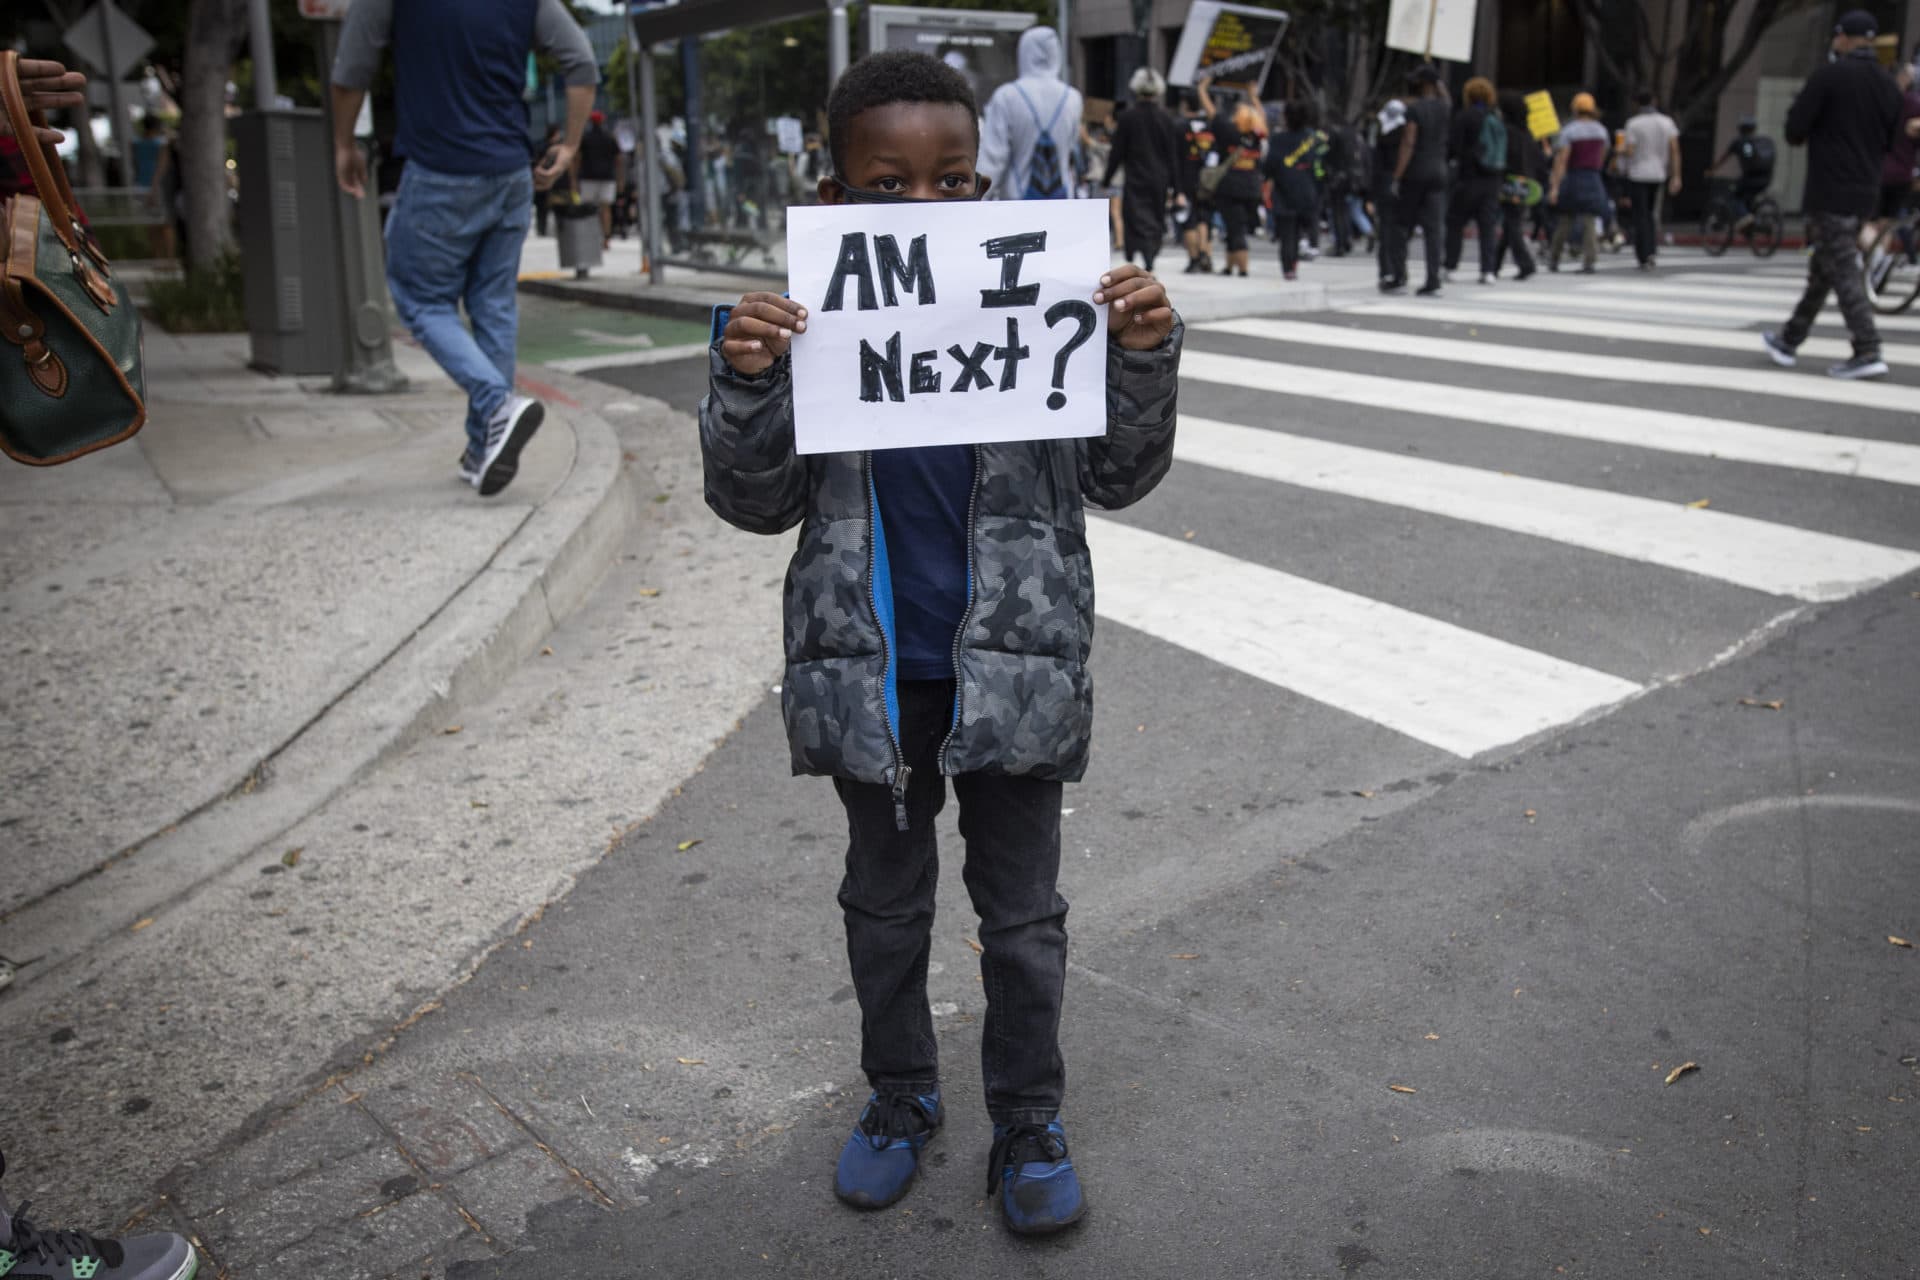 A boy holds a sign during a protest in downtown Los Angeles, Friday, May 29, 2020, over the death of George Floyd, who died in police custody on Memorial Day in Minneapolis. (AP Photo/Christian Monterrosa)